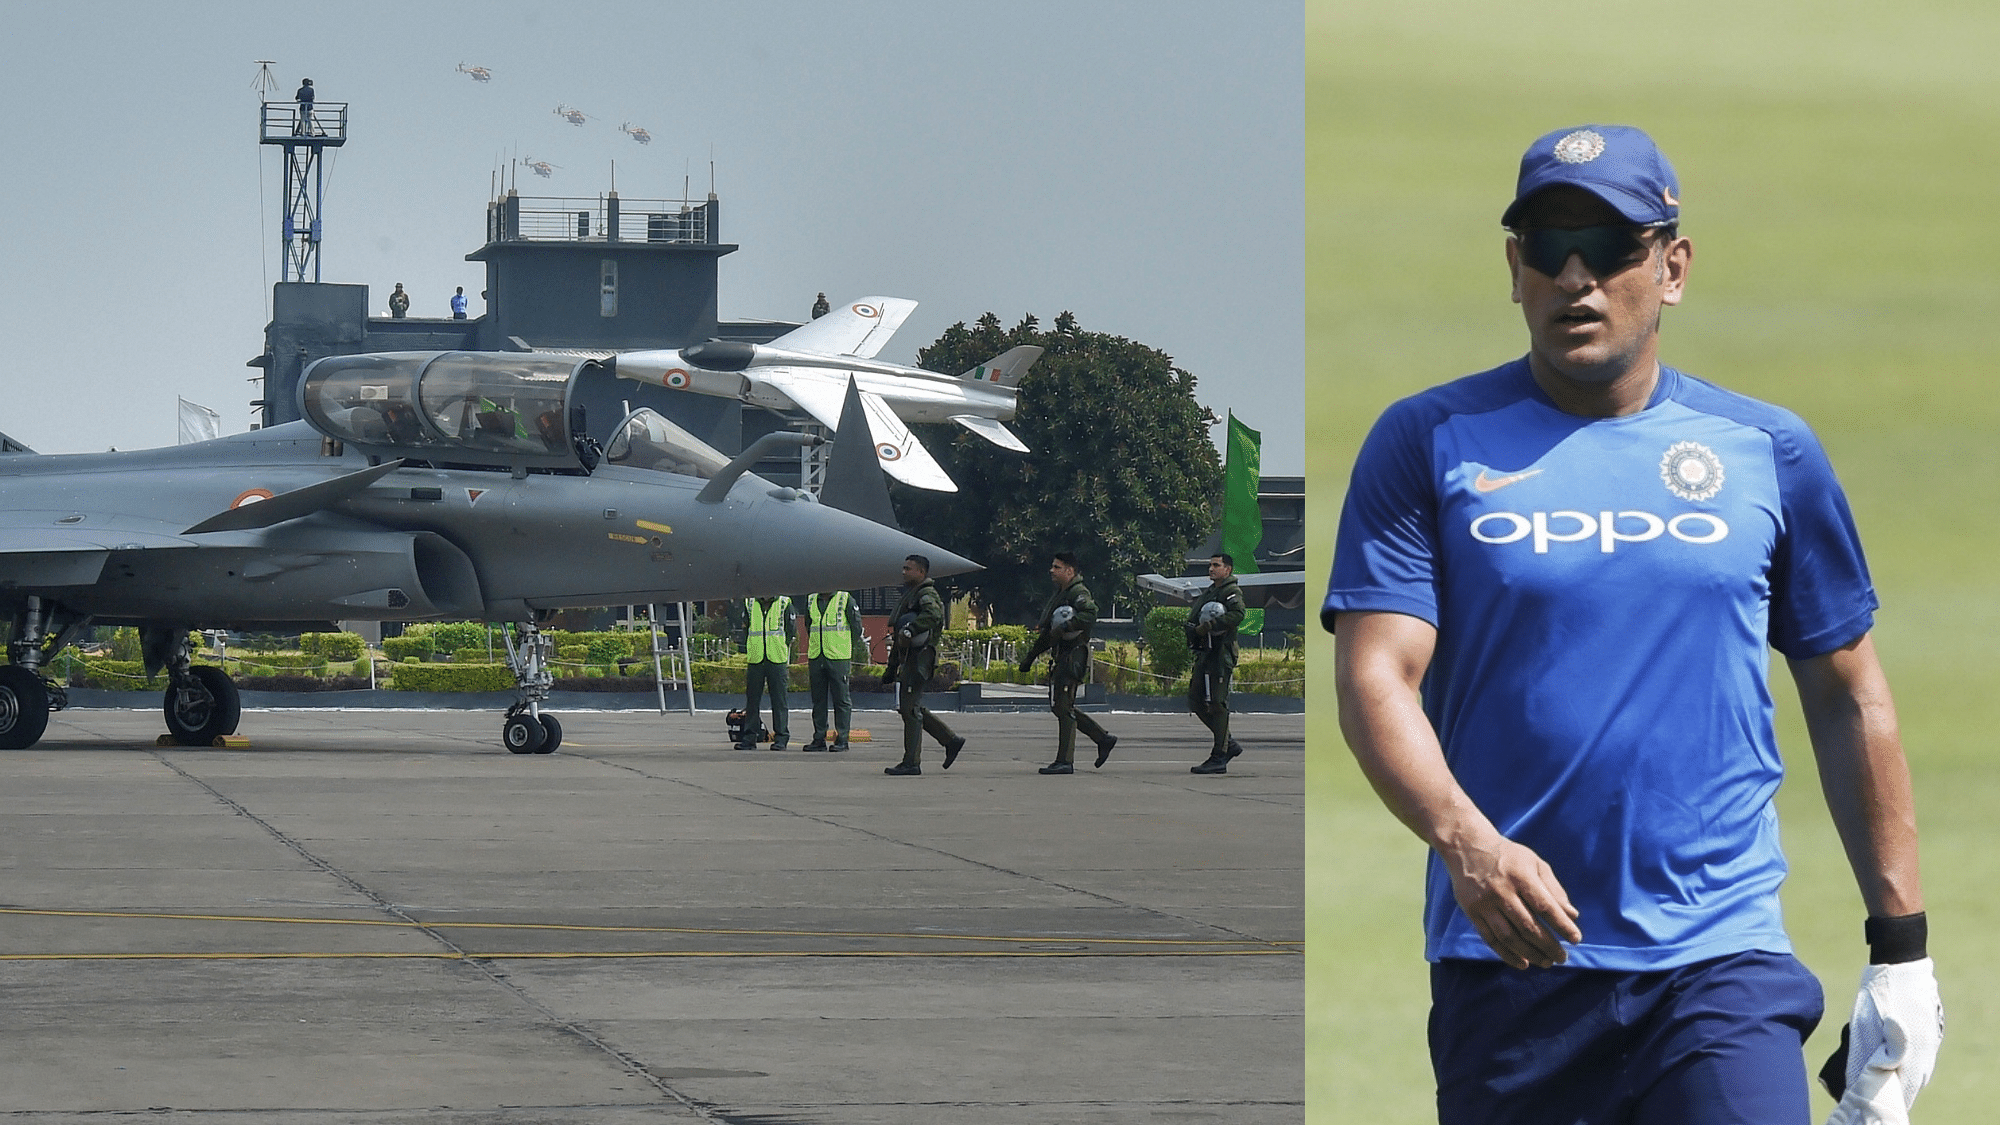 MS Dhoni has tweeted following the final induction ceremony of the Rafale jets into the Indian Air Force (IAF).